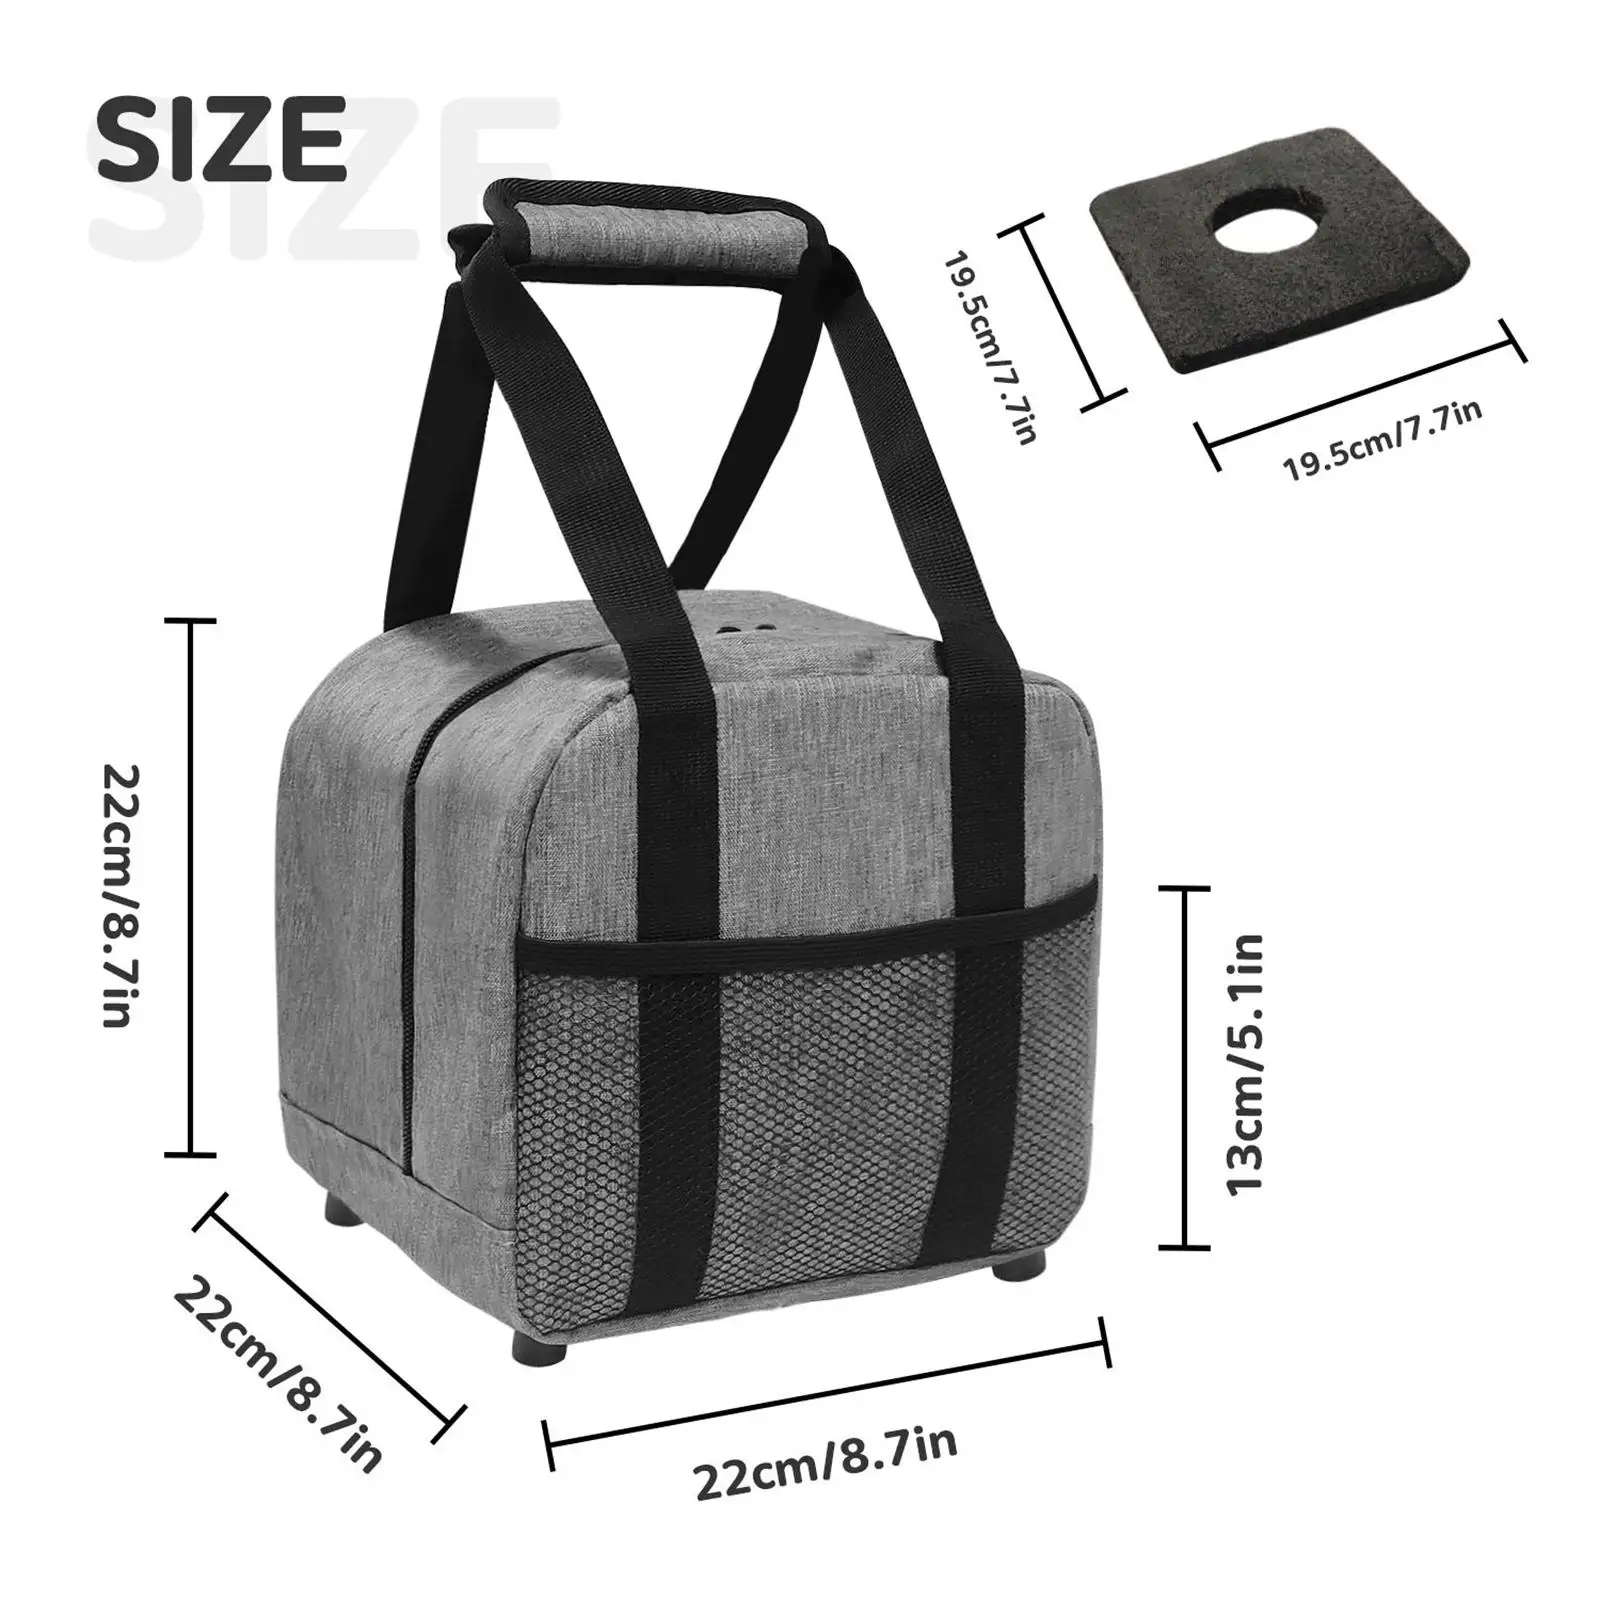 Bowling Ball Bag for Easy Carrying Compact Oxford Cloth Durable Bowling Handbag for Outdoor Sports Training Bowling Accessories